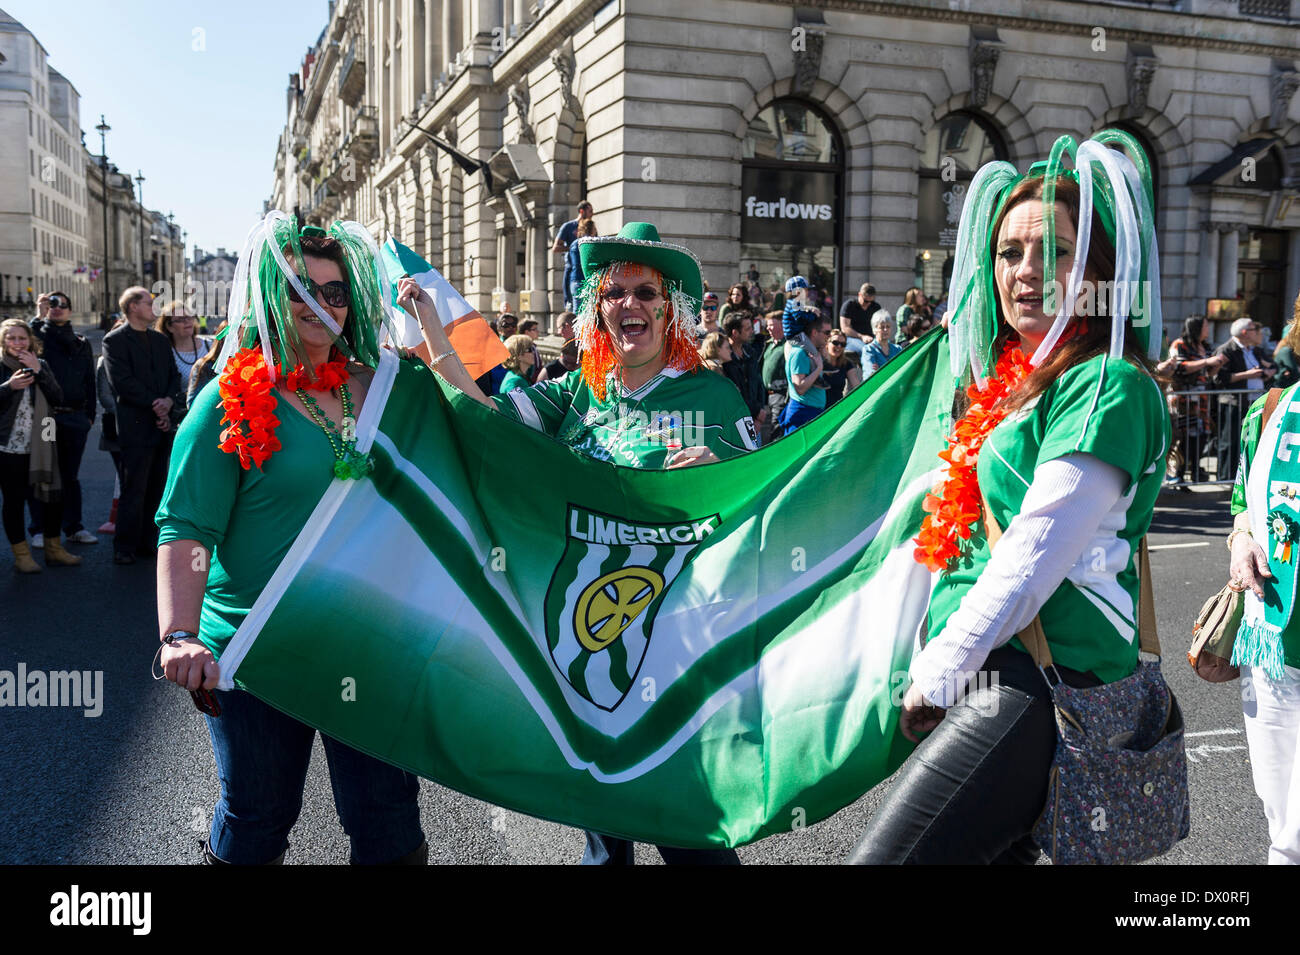 London, UK. 16 March 2014. Three Irish women celebrating during the annual st Patrick's Day parade in London.  Photographer:  Gordon Scammell/Alamy Live News Stock Photo